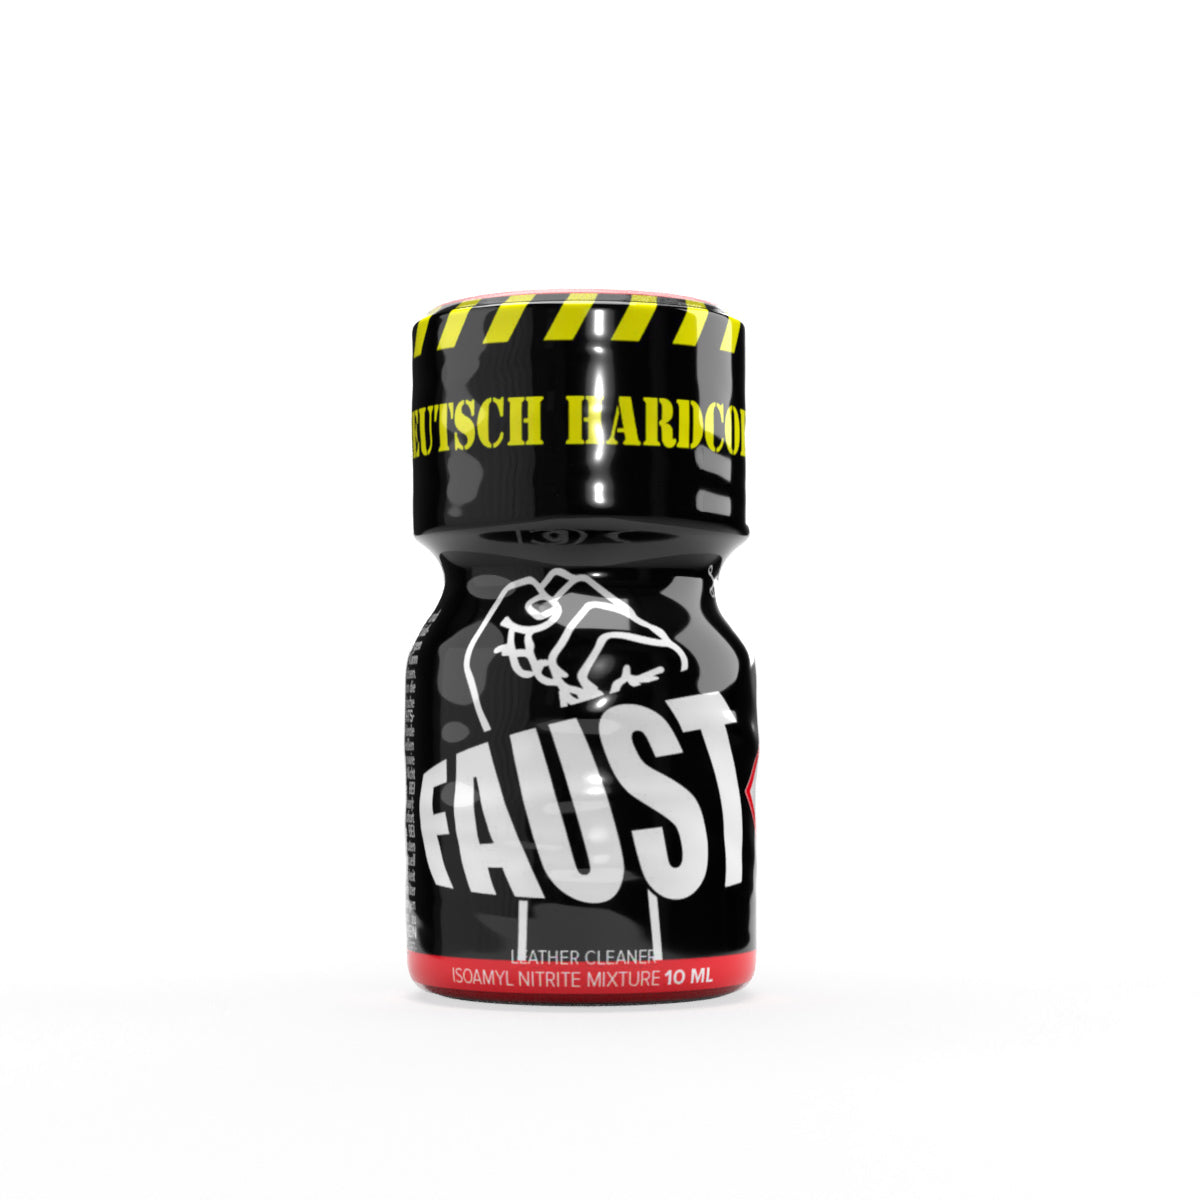 A product photo of a 10ml bottle of Faust Poppers.